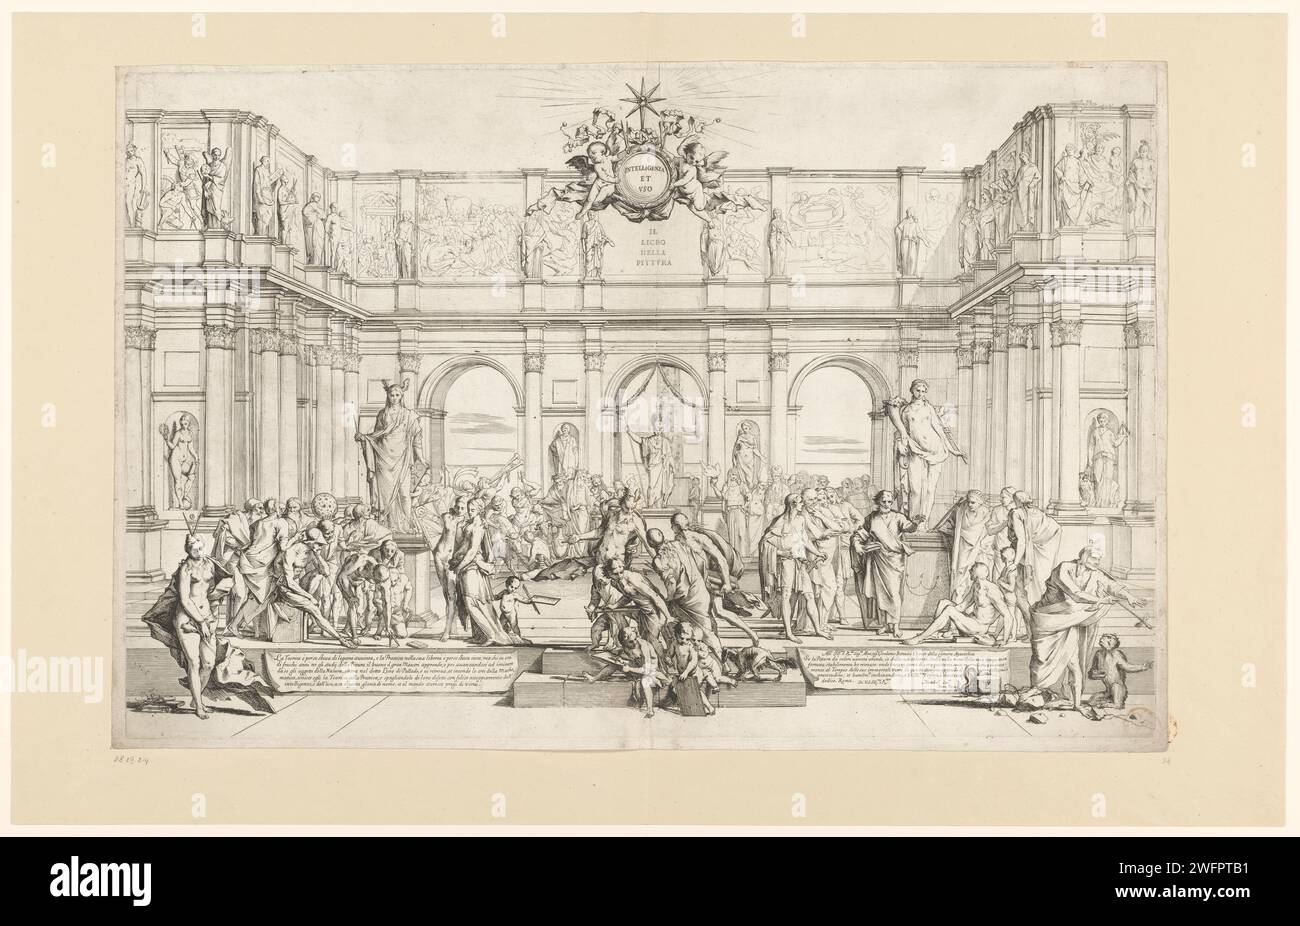 Academy of Painting, Pietro Testa, 1621 - 1650 print View of a courtyard with three groups of artists who represent imitation, observation and perfection. The artists appear for scientists. On the far left is the personification of the theory. On the far right is the personification of the practice with a monkey, symbol for the IM Itation. She blindly grabs away from the performance. There are different sculptures between the figures. Left and bottom right papers with text. In the middle of two putti that wear a medallion with text: 'Intelligenza et uzo'. Italy paper etching academy, associati Stock Photo